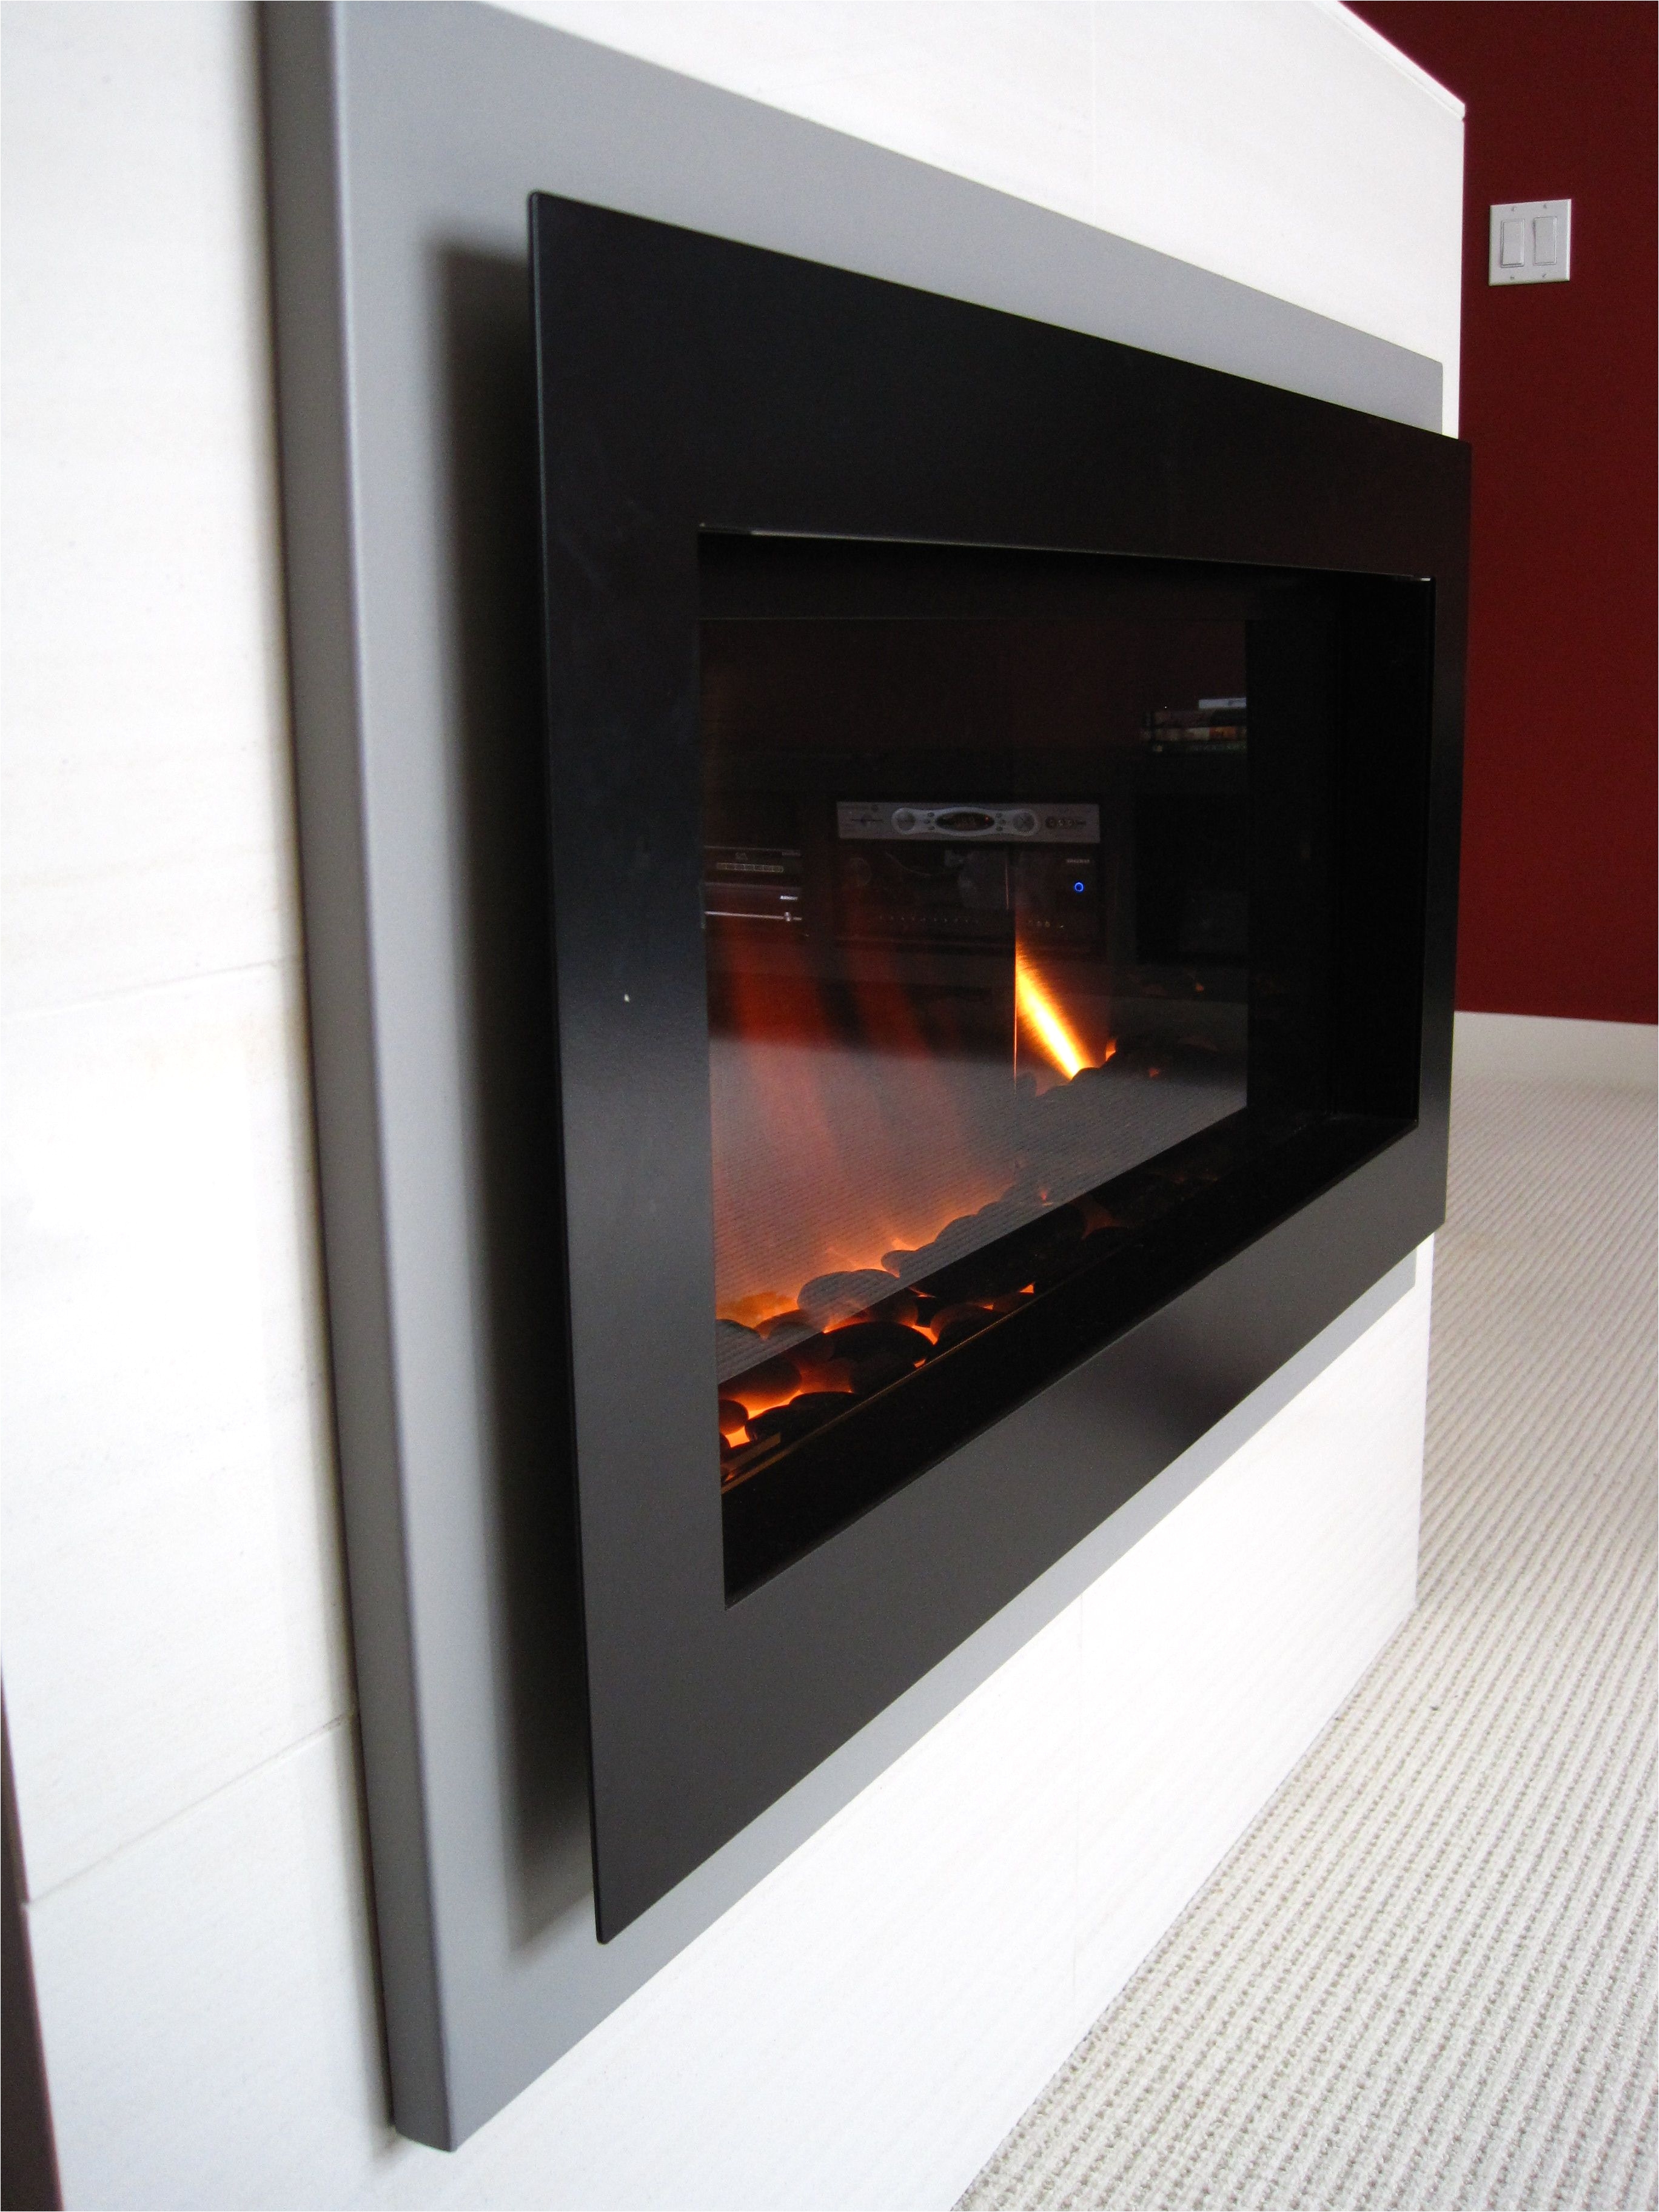 electric log inserts for existing fireplaces uk electric fireplaces a modern electric fireplace design of electric log inserts for existing fireplaces uk